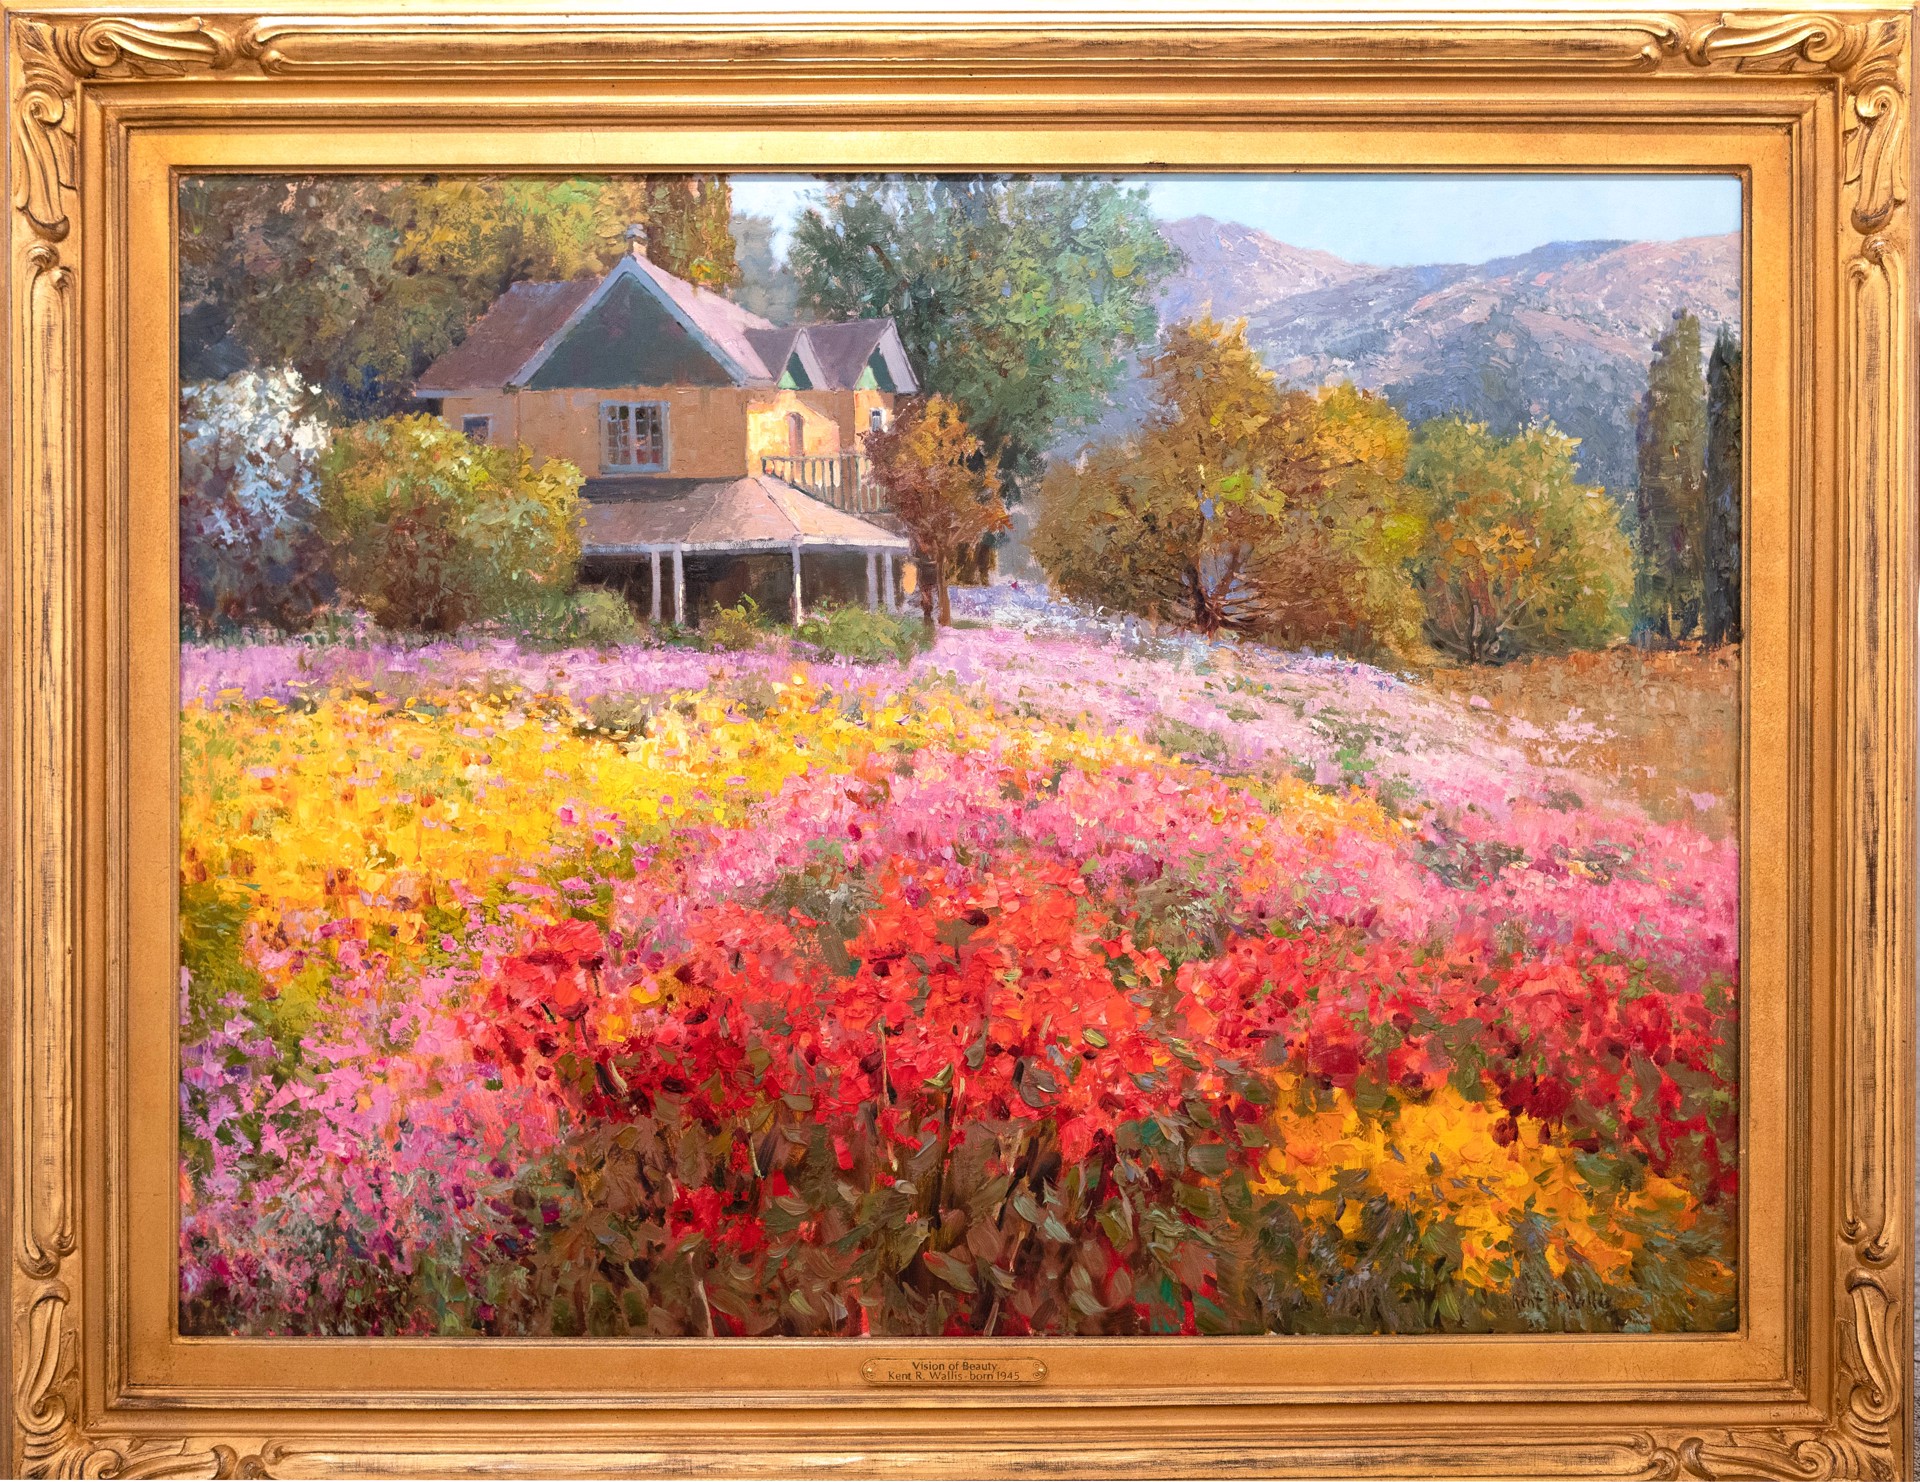 Vision of Beauty by Kent Wallis